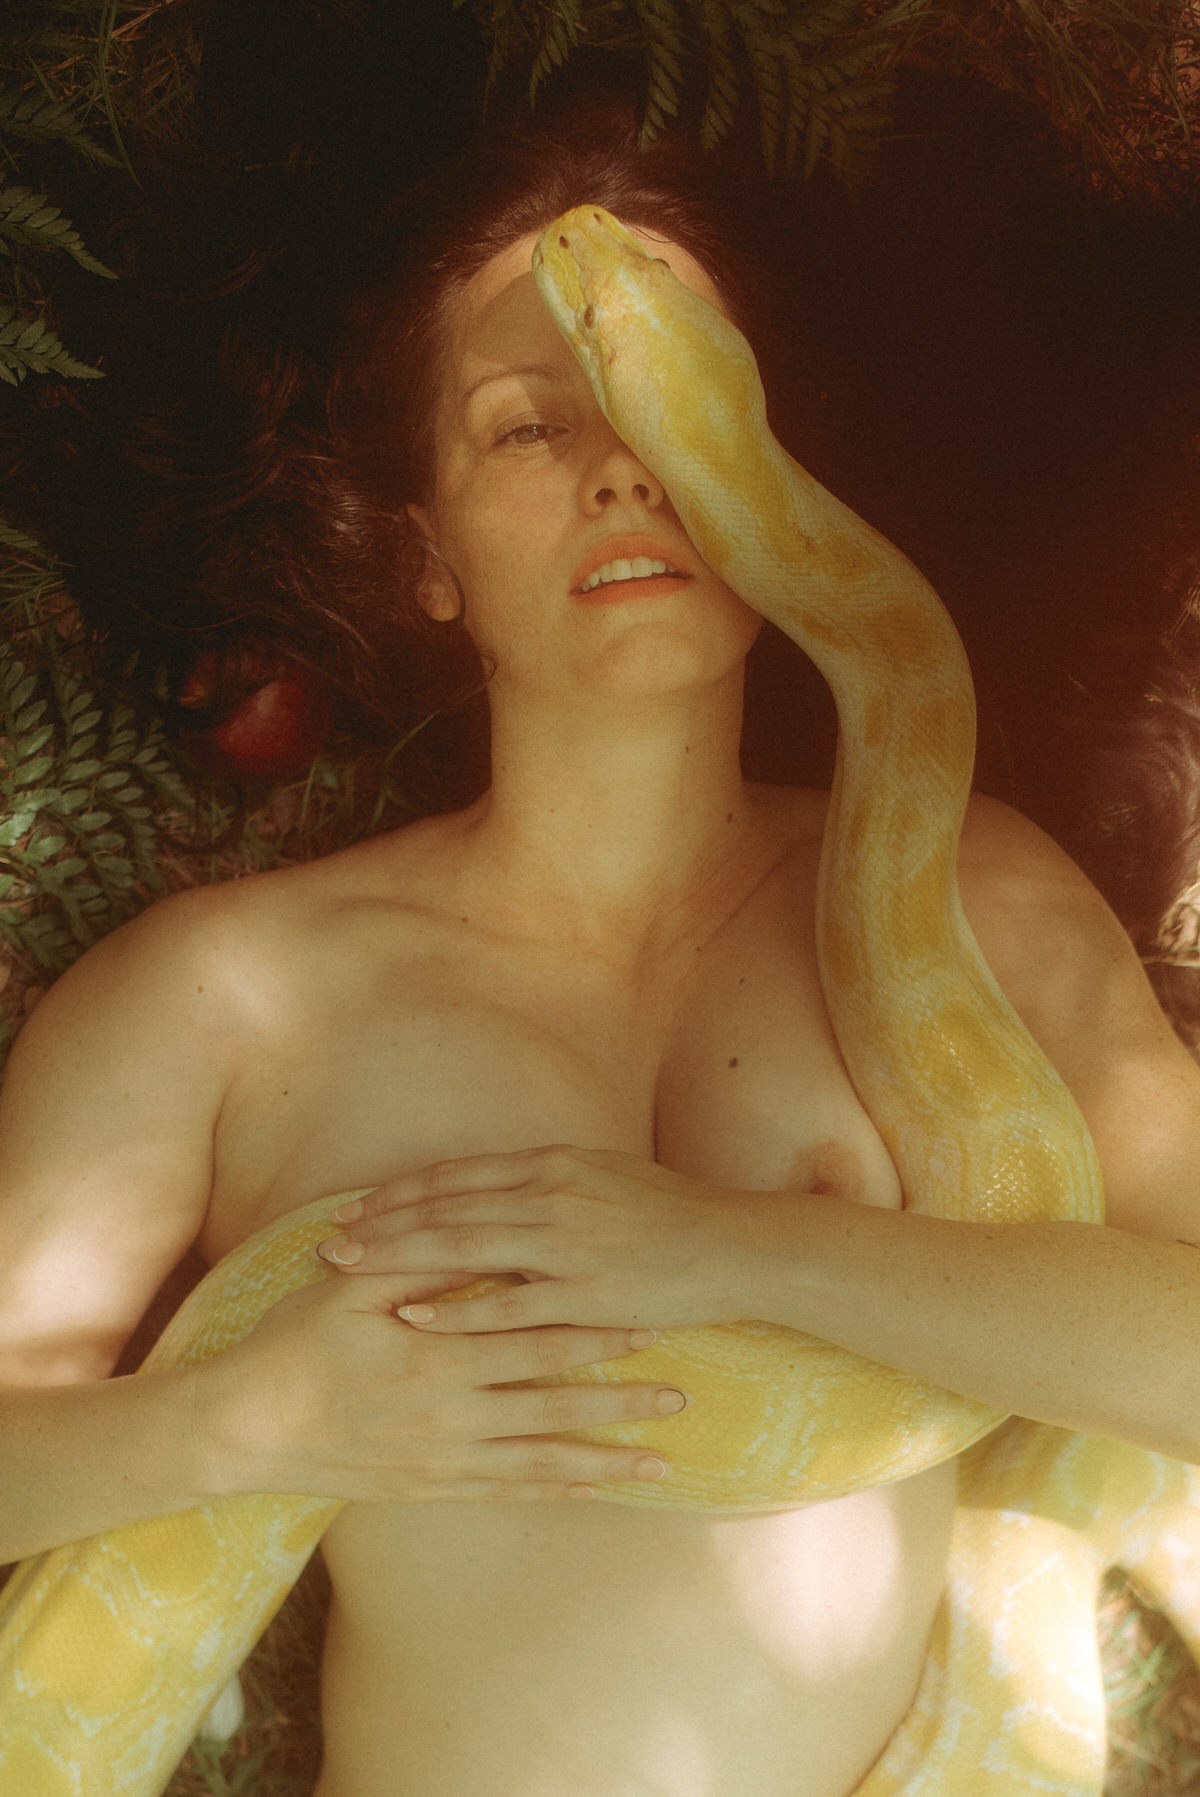 A woman laying on her back in the forest with a snake covering half of her face.